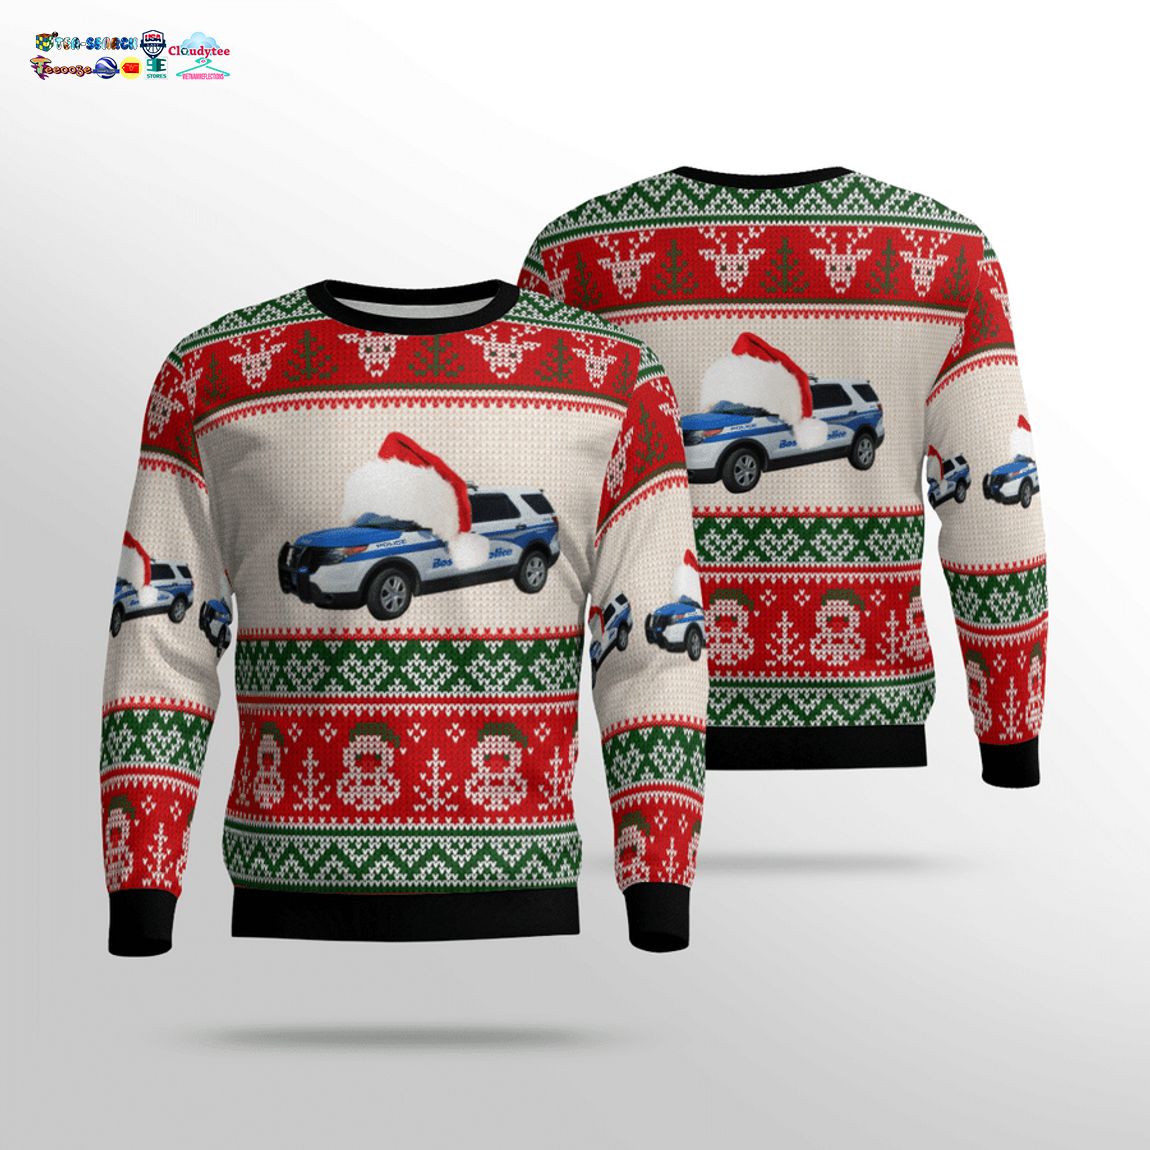 Boston Police Department Ver 2 3D Christmas Sweater